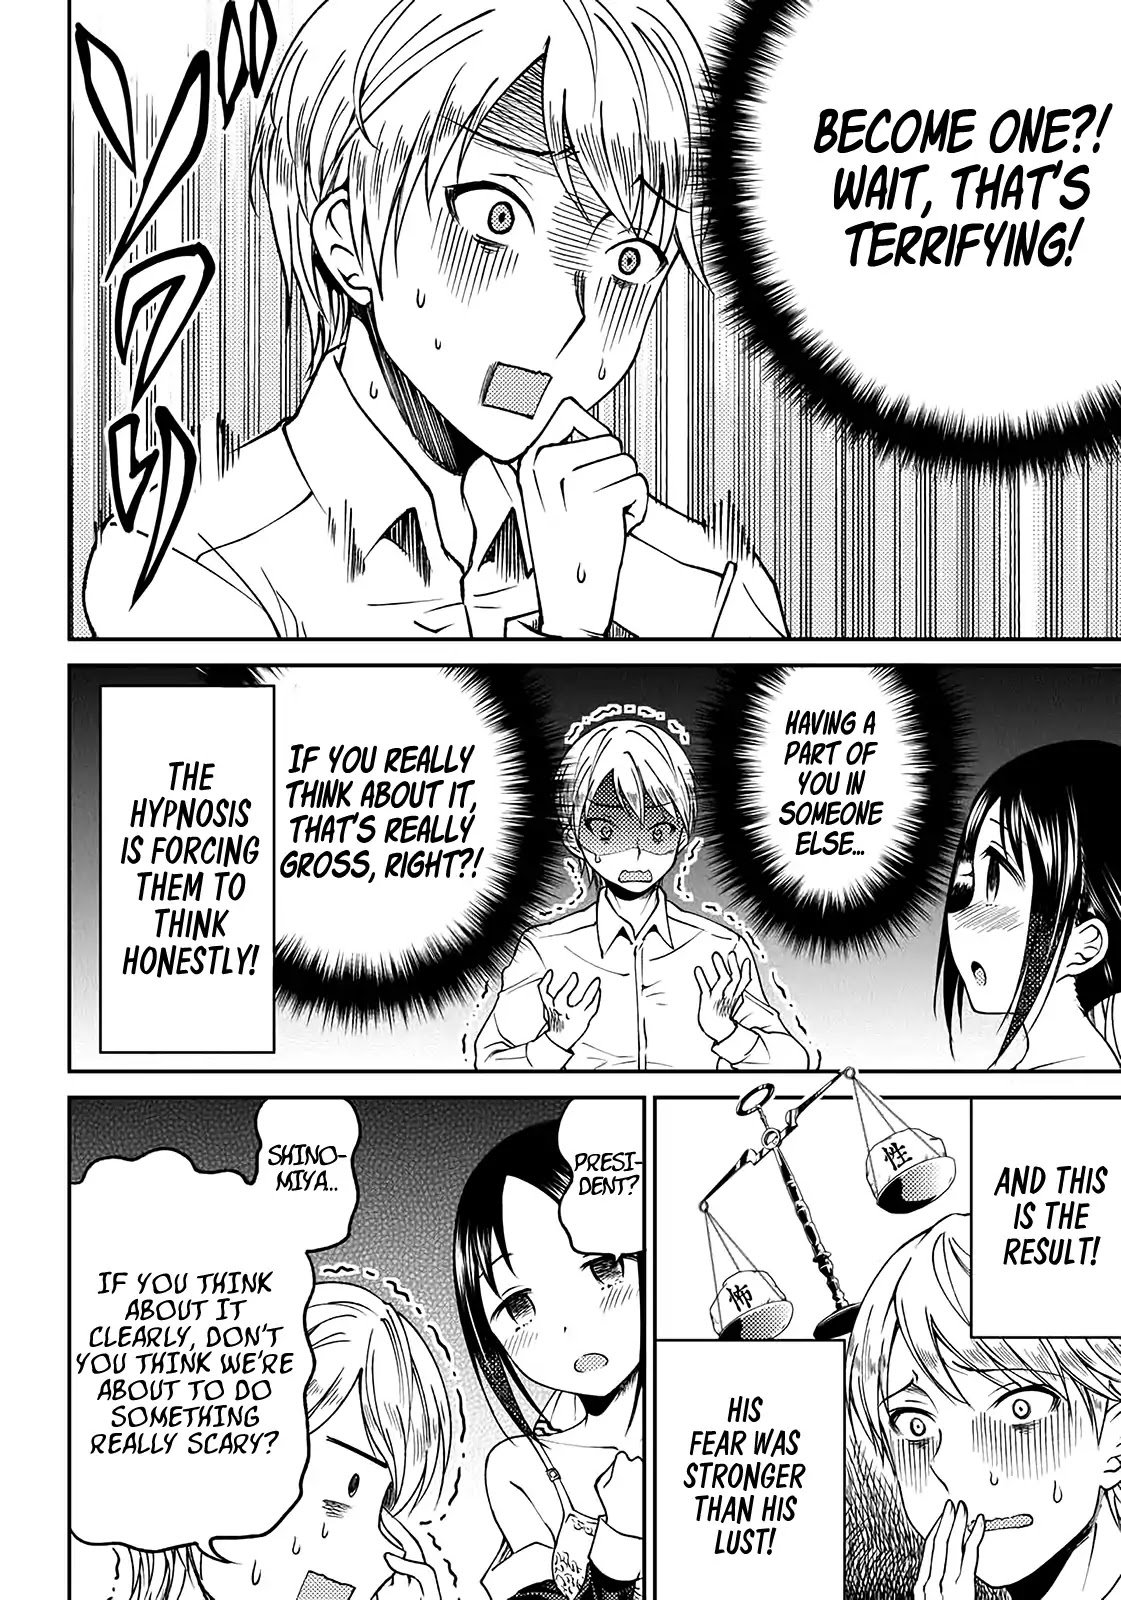 kaguya-wants-to-be-confessed-to-official-doujin-chap-3-19